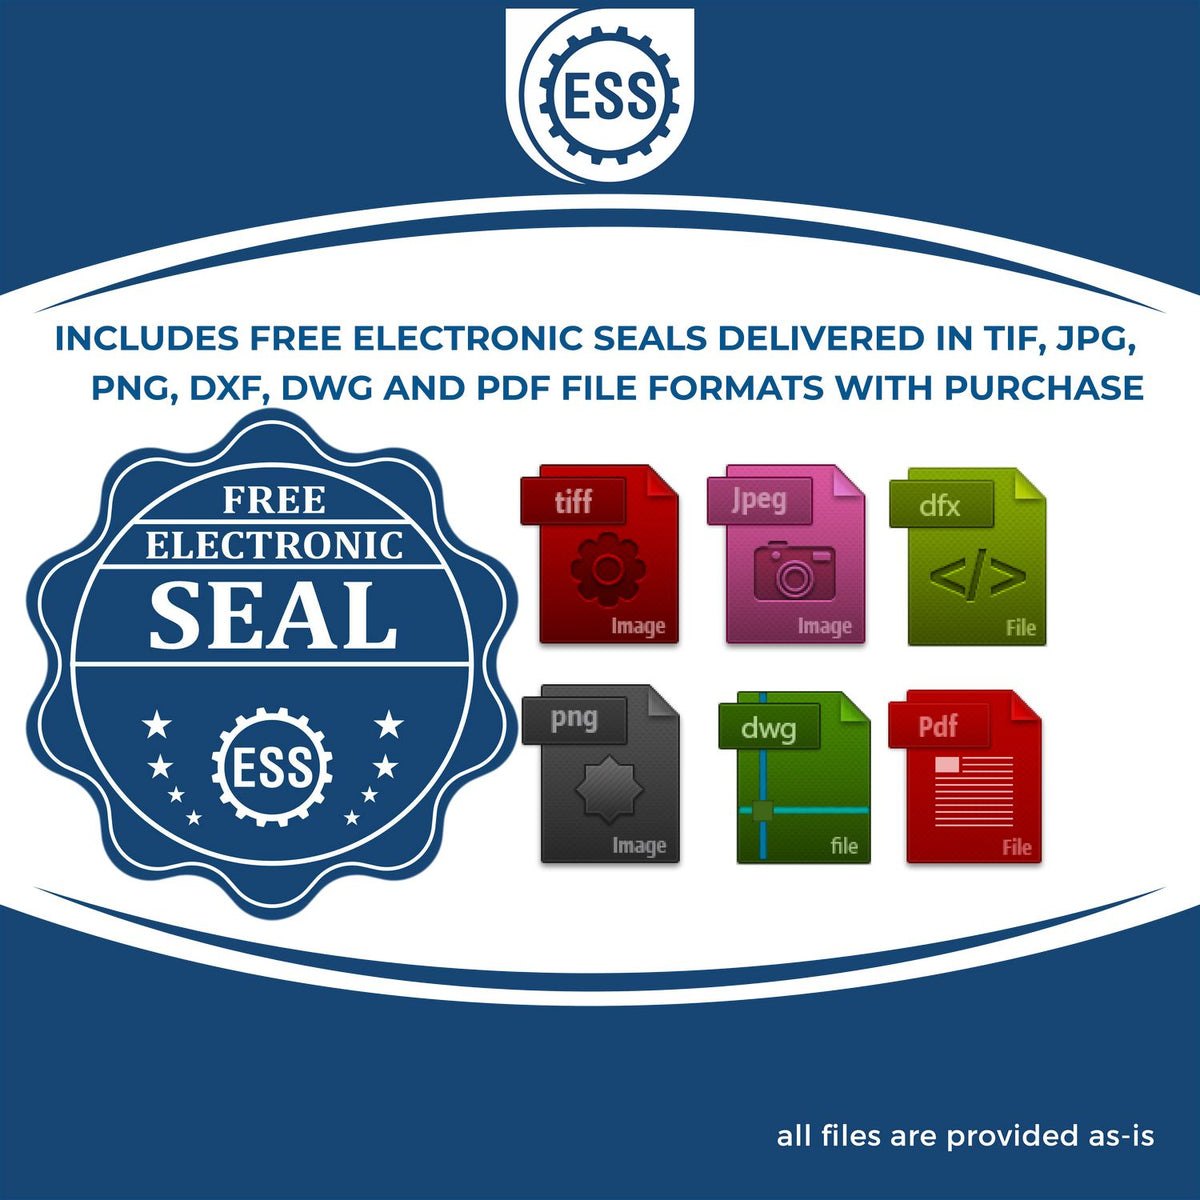 An infographic for the free electronic seal for the Slim Pre-Inked State Seal Notary Stamp for Utah illustrating the different file type icons such as DXF, DWG, TIF, JPG and PNG.